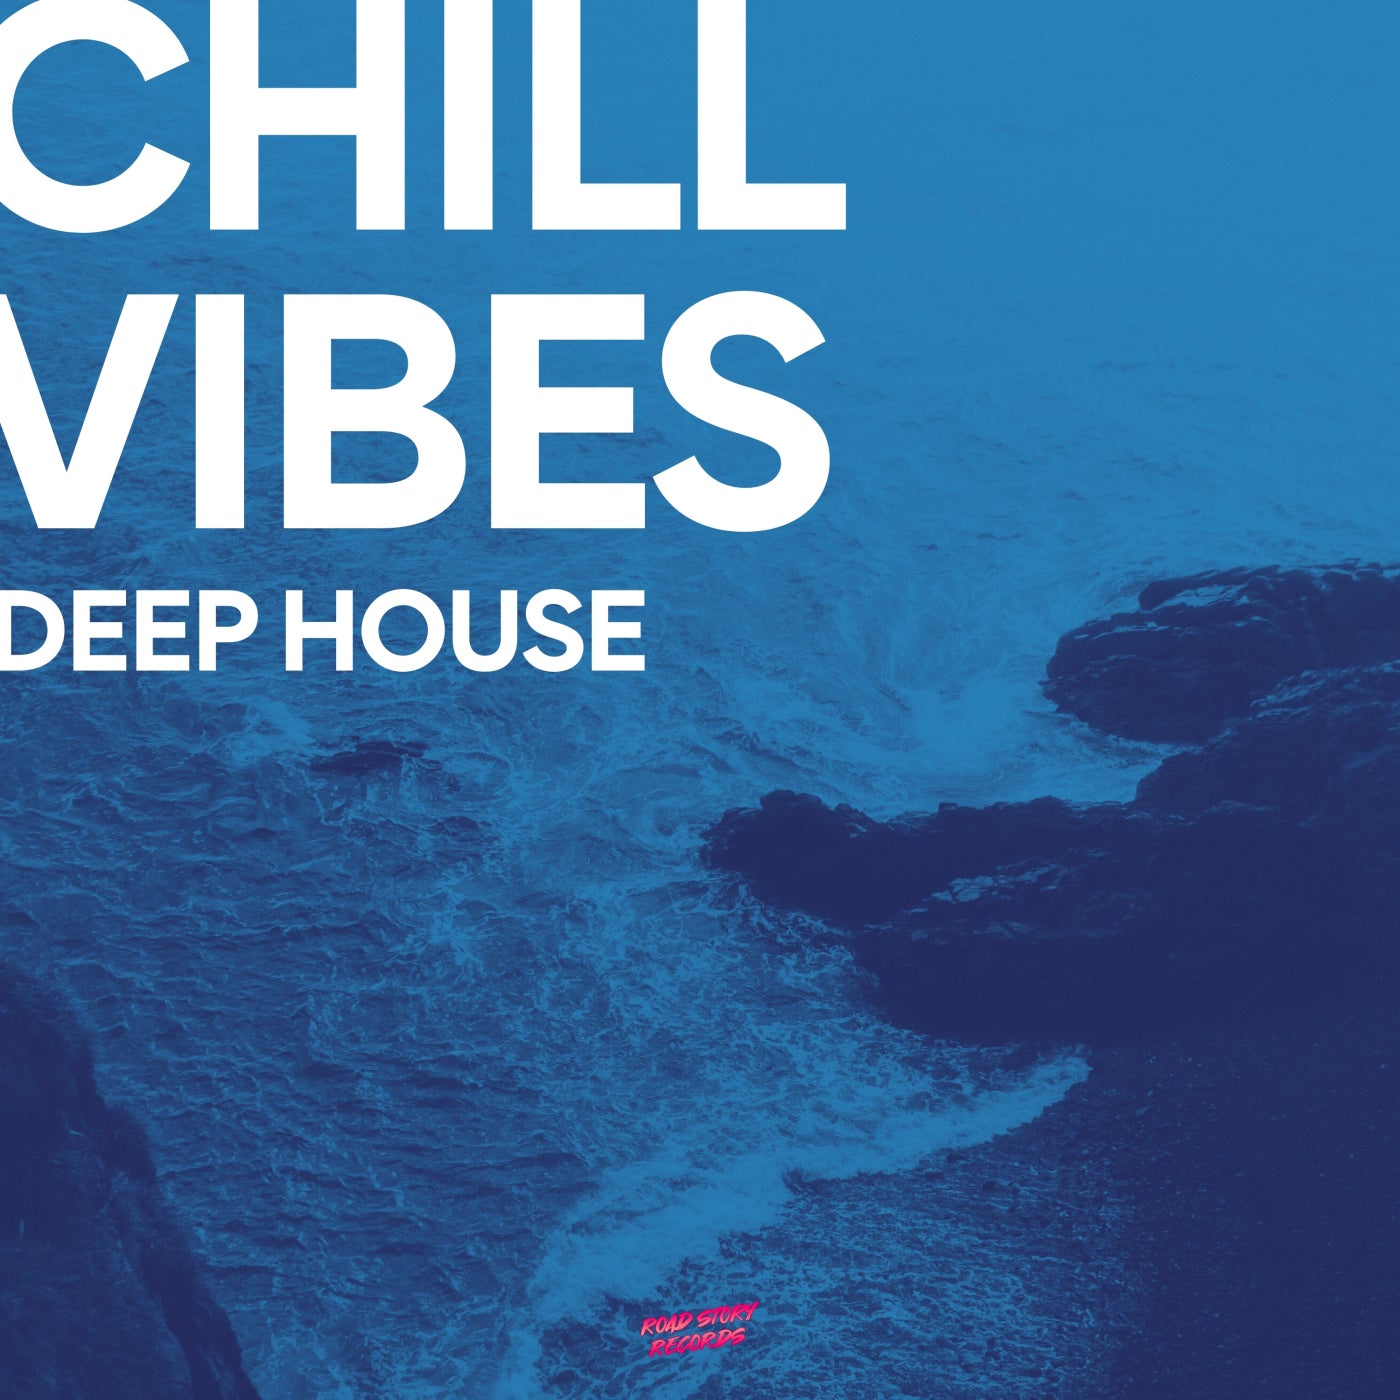 Chill Vibes Deep House